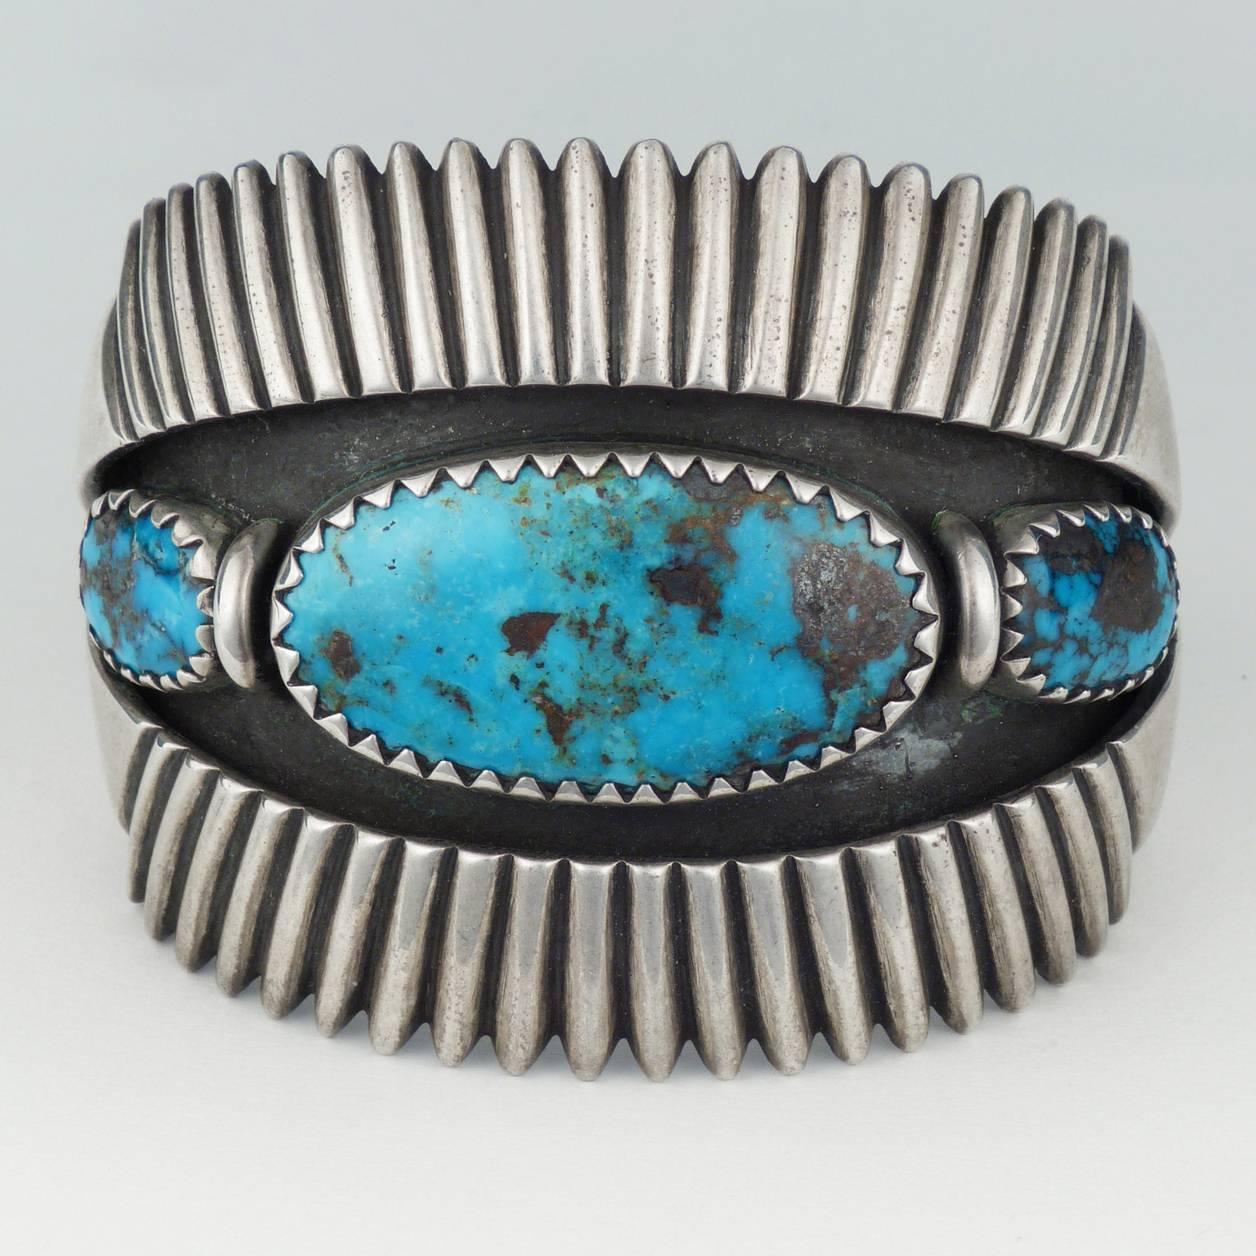 An exquisite handmade bracelet from the father of modern Navajo jewelry, Kenneth Begay (1913-1977). Three hand sawn bezels encircle gem quality Morenci turquoise cabochons. Hand-chiseled ridges surround a shadowbox.